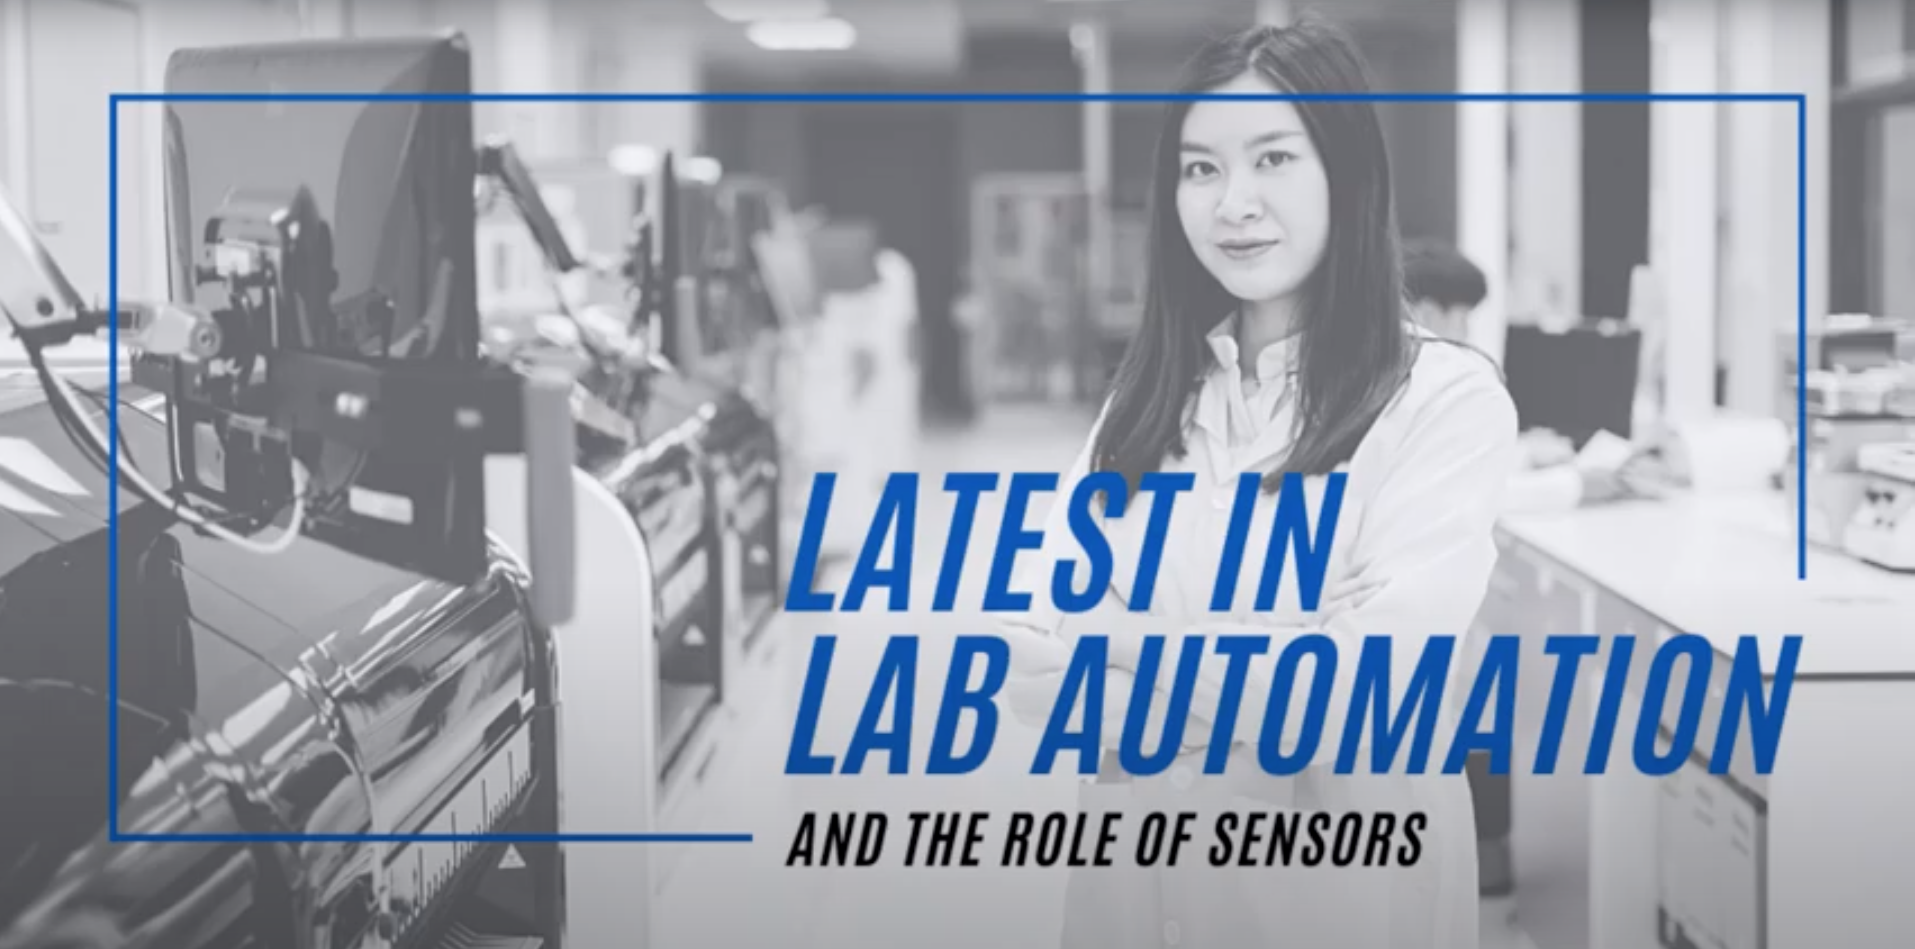 Experts Weigh in on the Role of Lab Automation and Sensor Technology in Advancing the Cell Therapy and Regenerative Medicine Fields